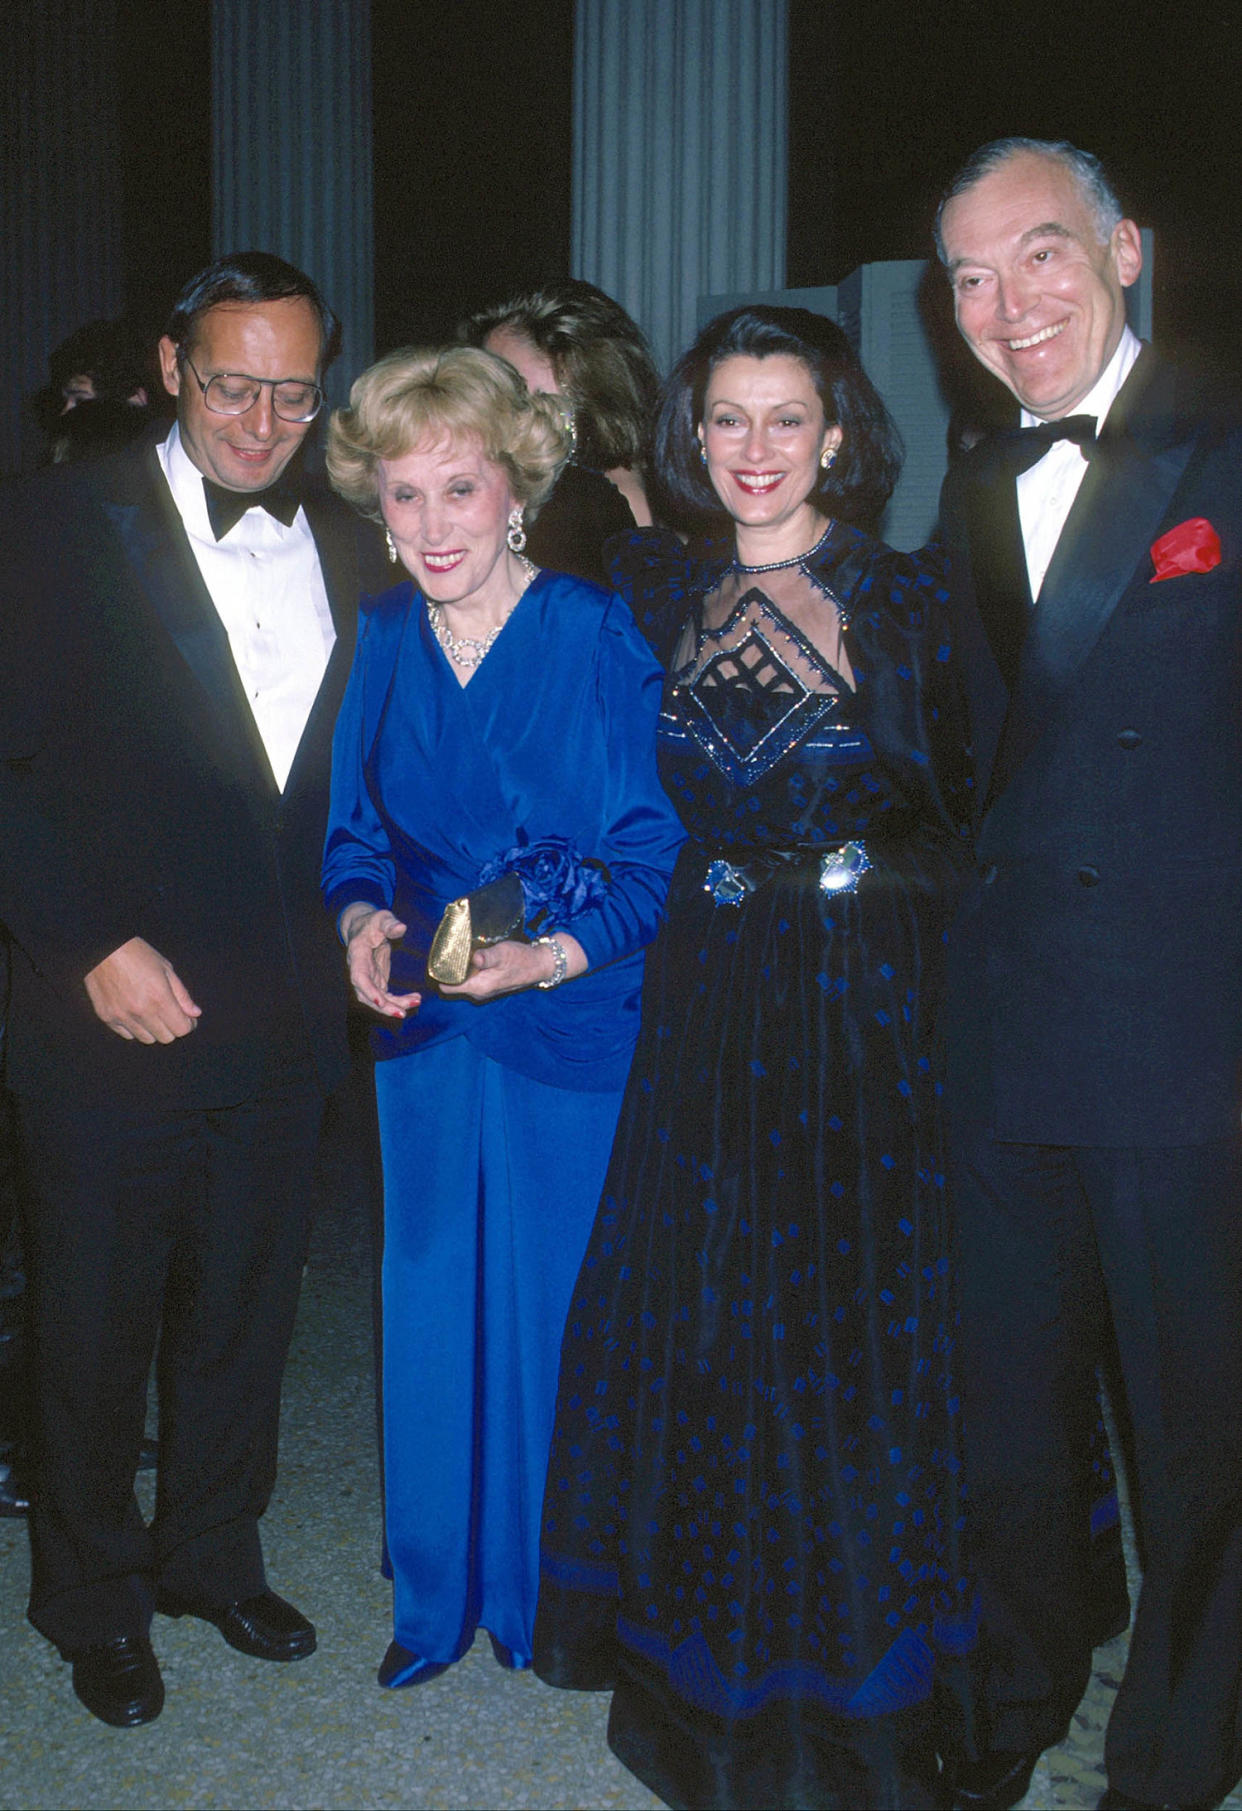 Estee Lauder and family (Images Press / Getty Images)